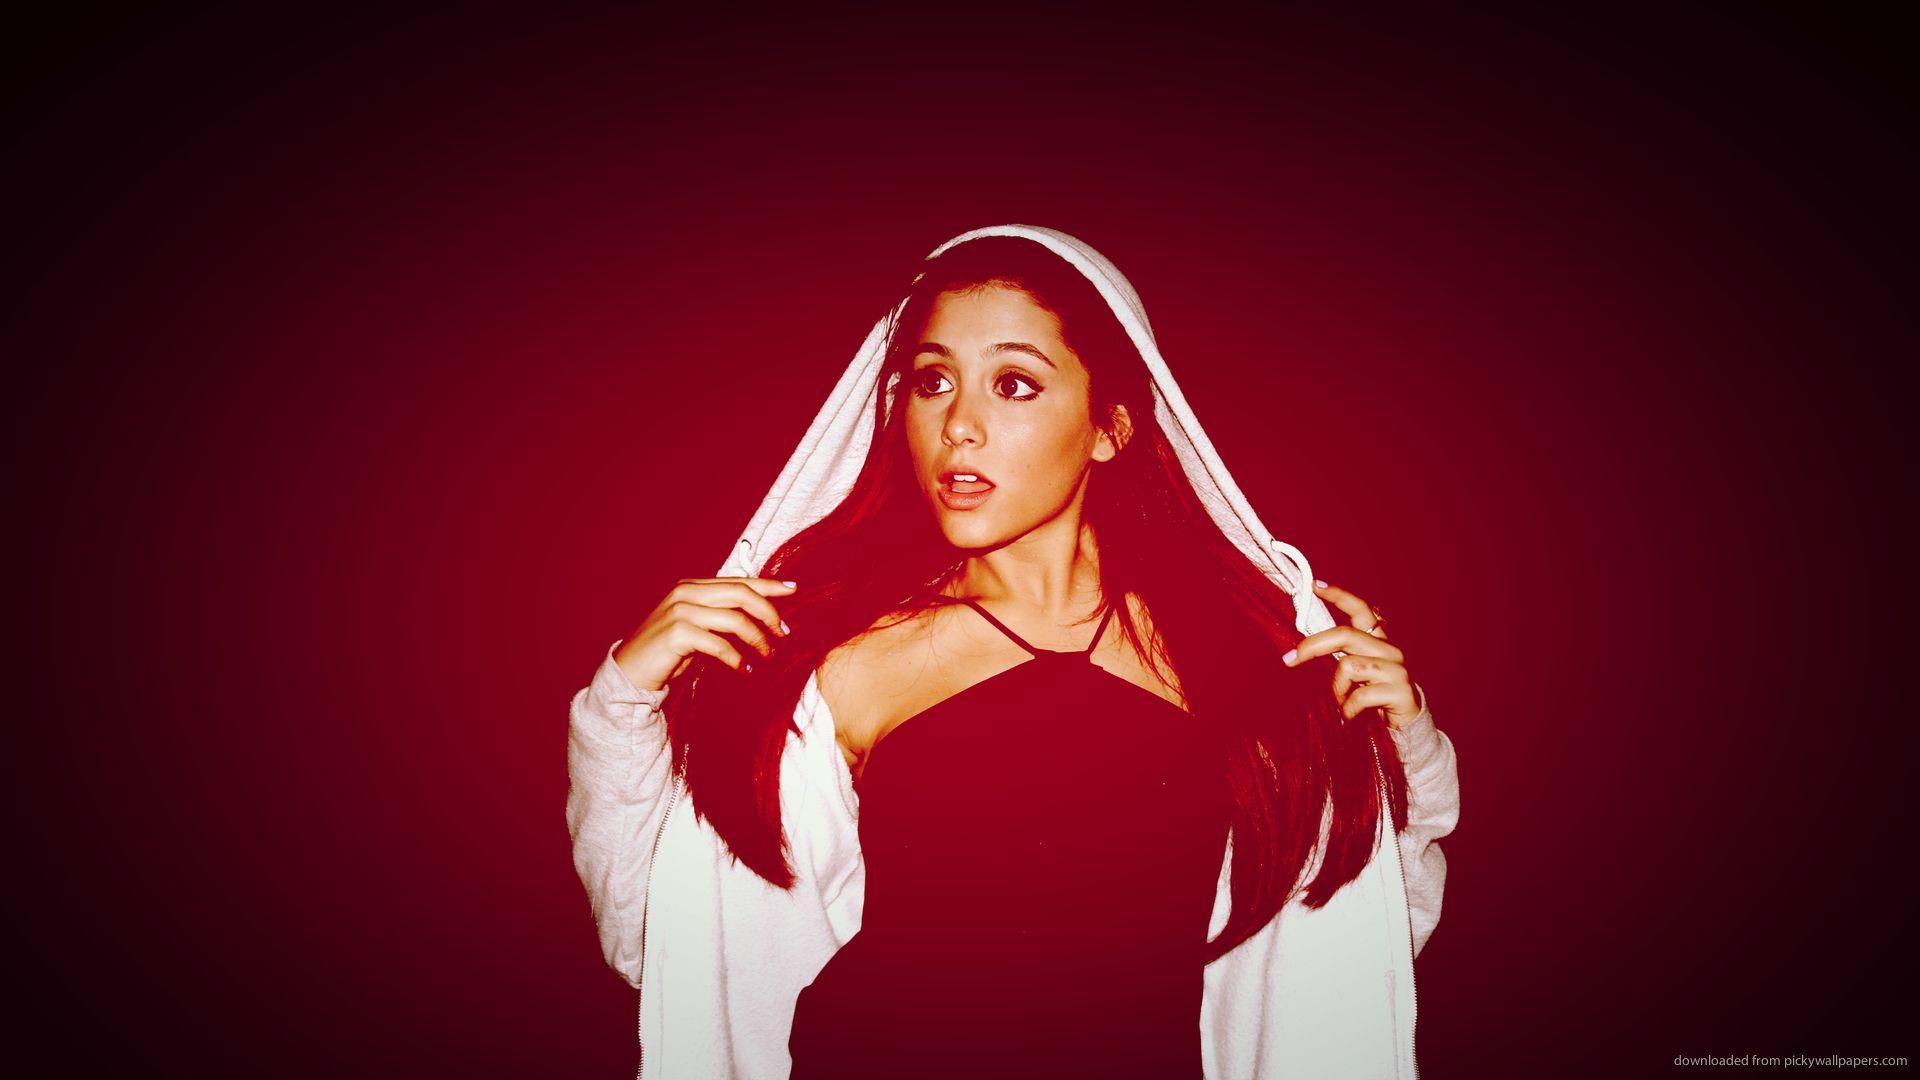 Download 1920x1080 Ariana Grande Red Highlight Wallpaper